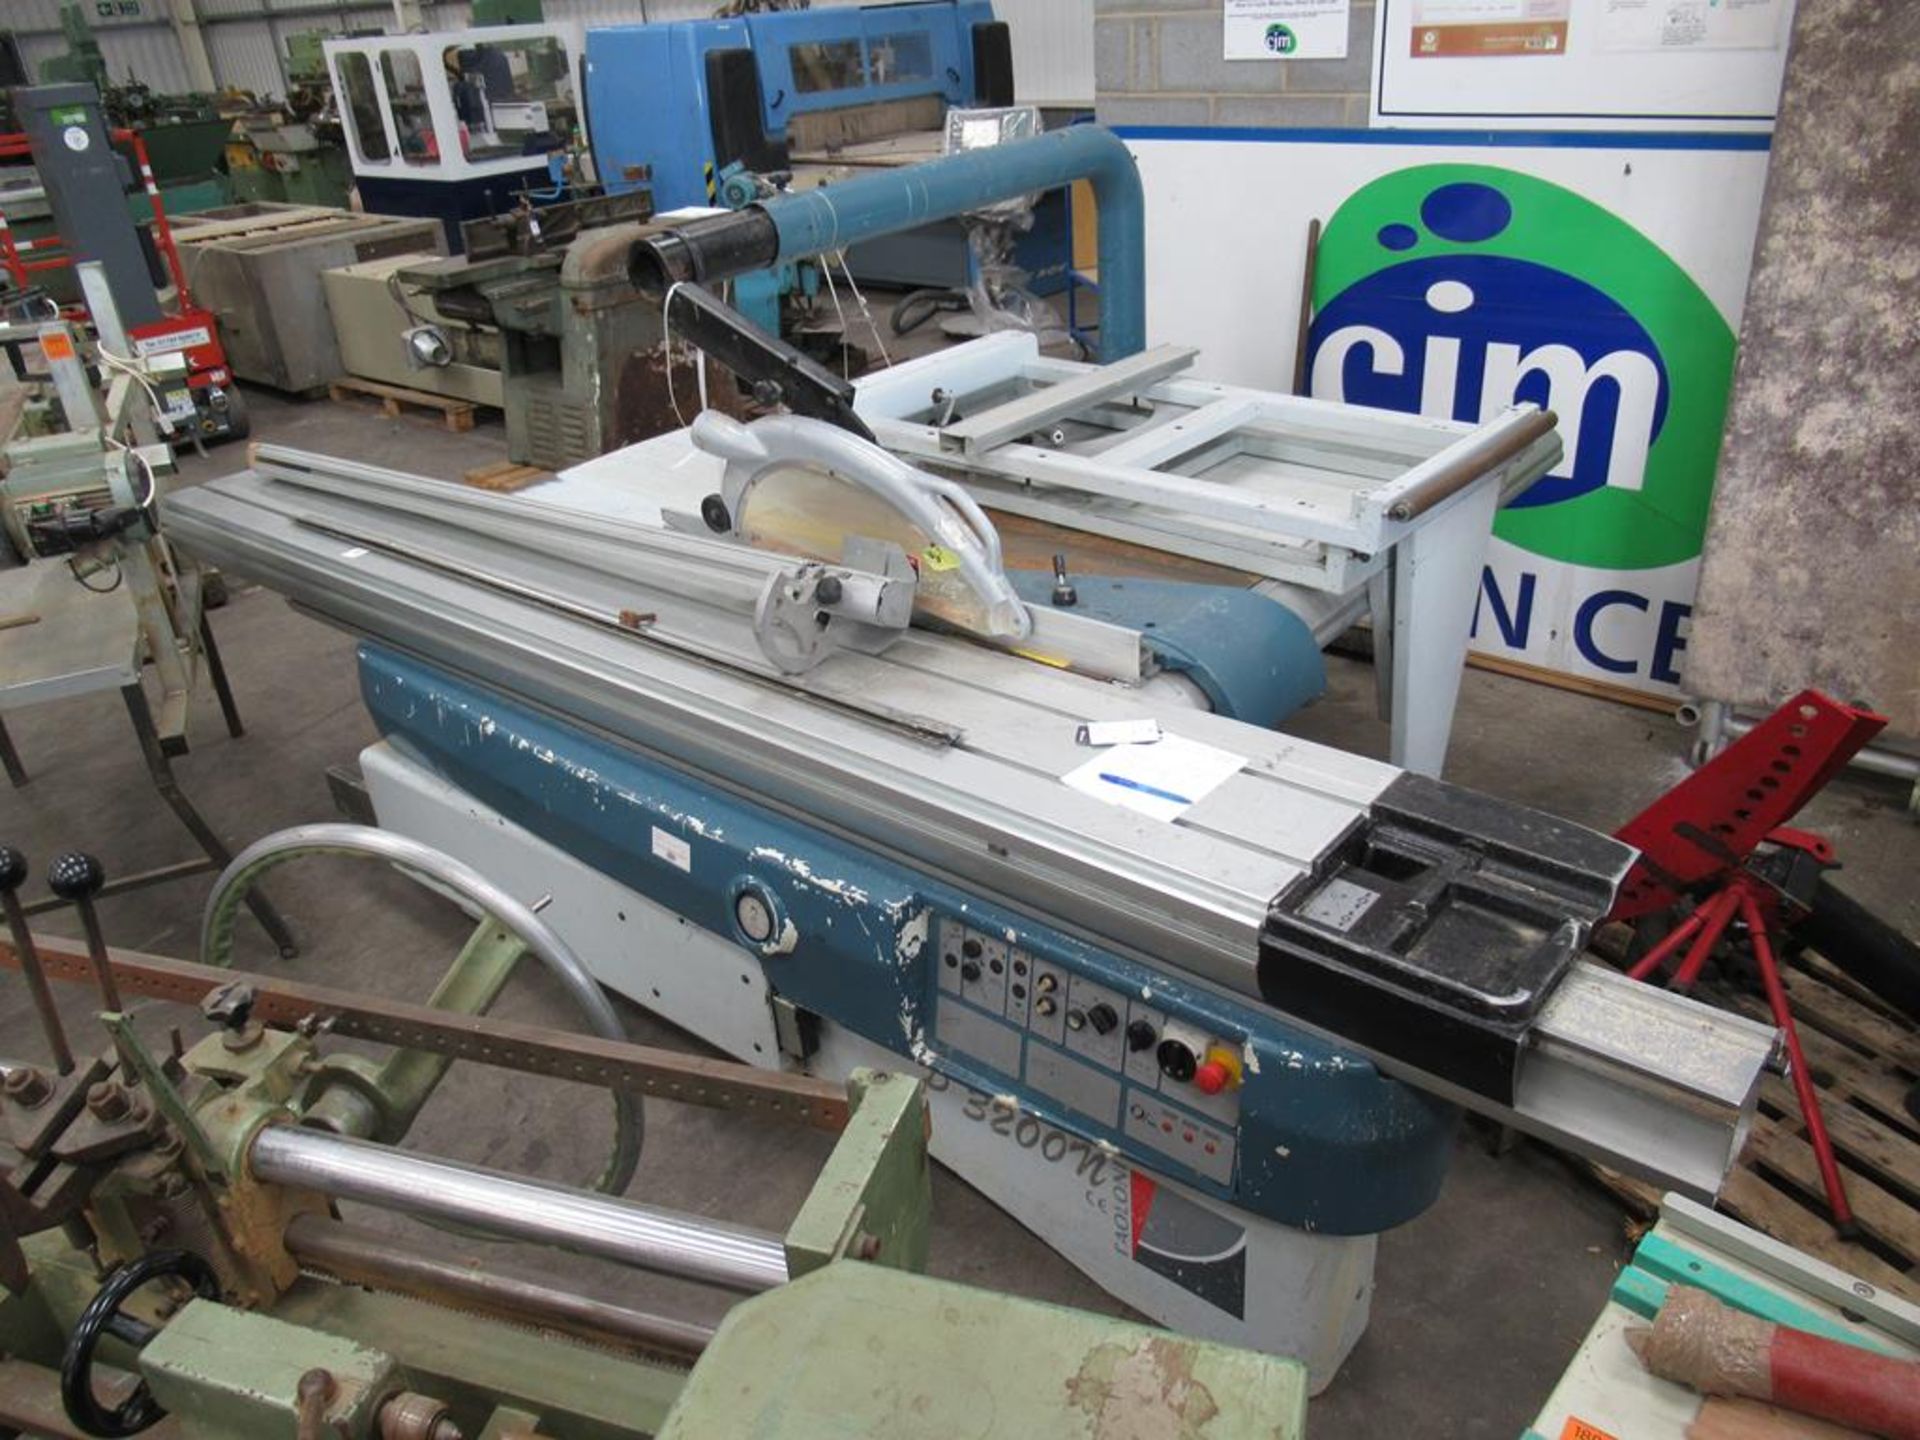 Paoloni P3200N Panel Saw YOM 2002 Serial 10664 3 phase. Please note that a Risk Assessment and Metho